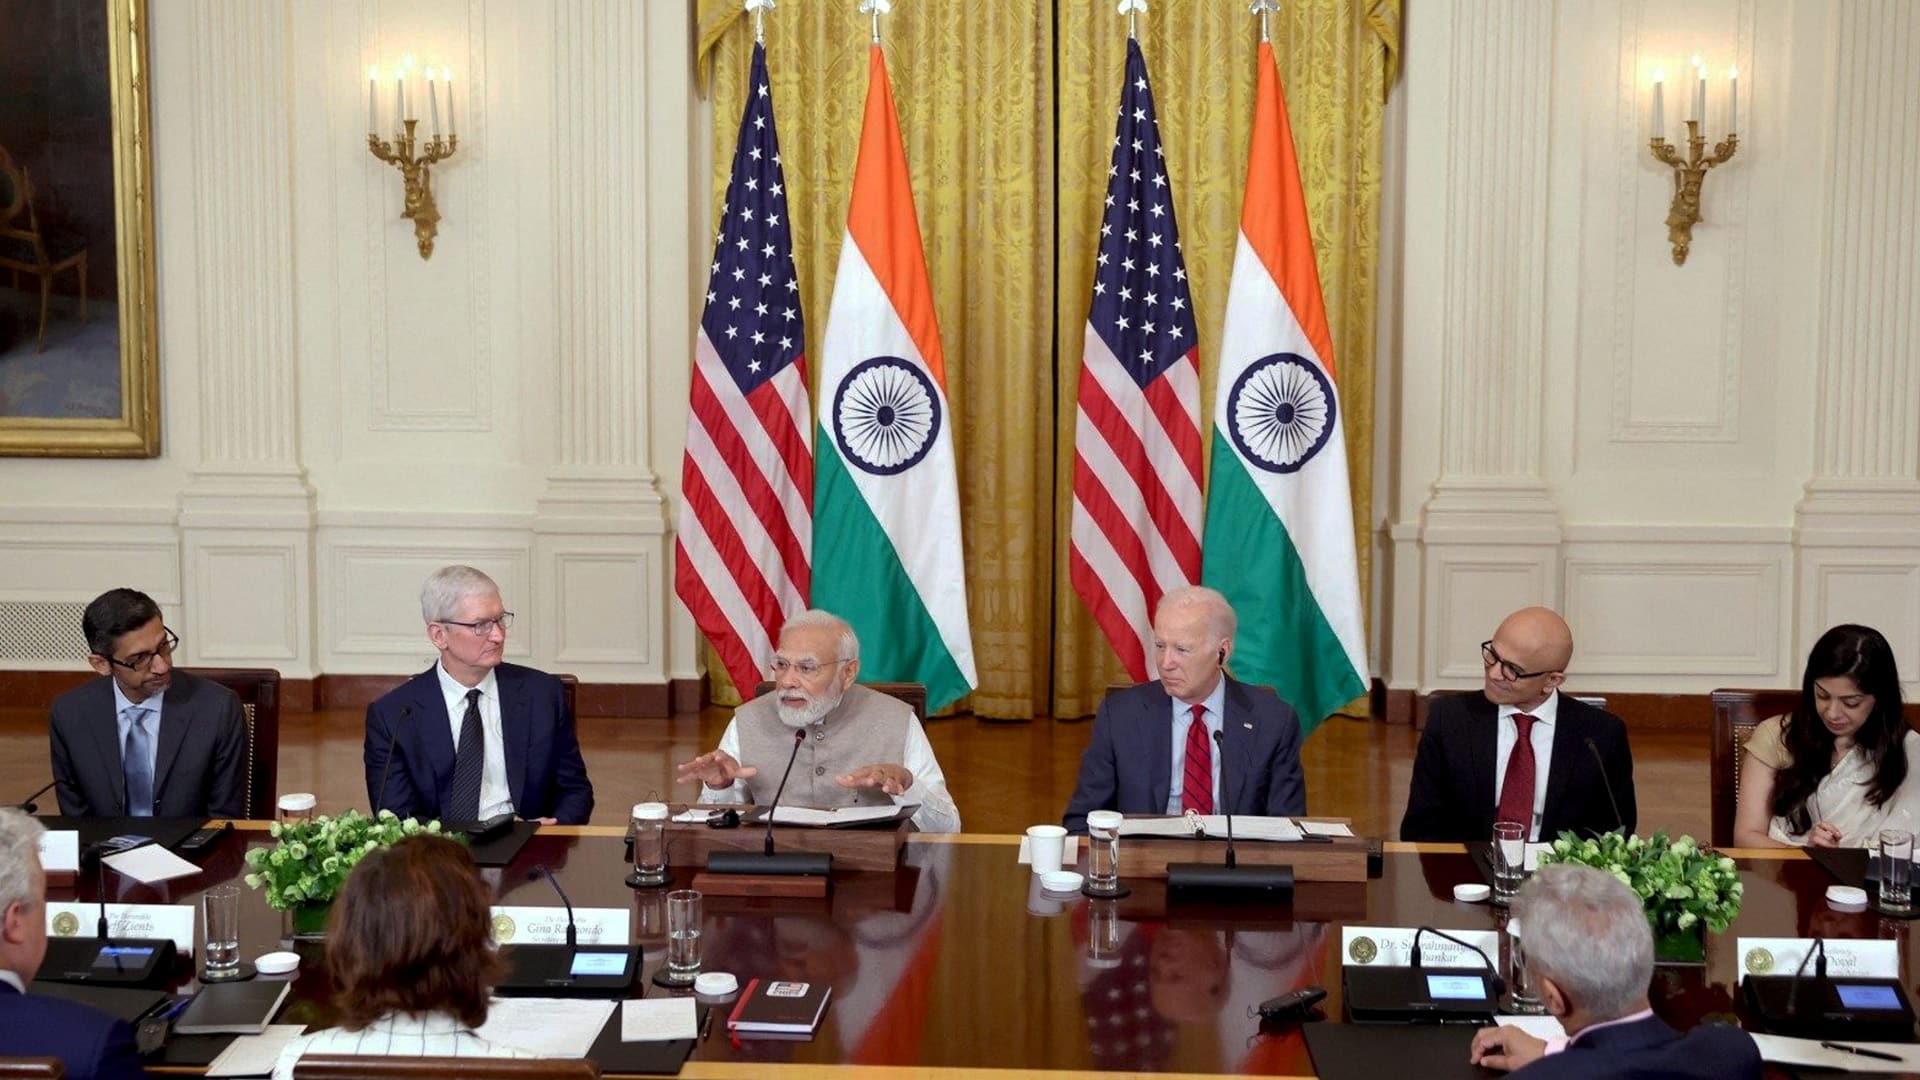 Coming together of Indian talent and US technology guarantees brighter future: PM Modi at meet of top CEOs